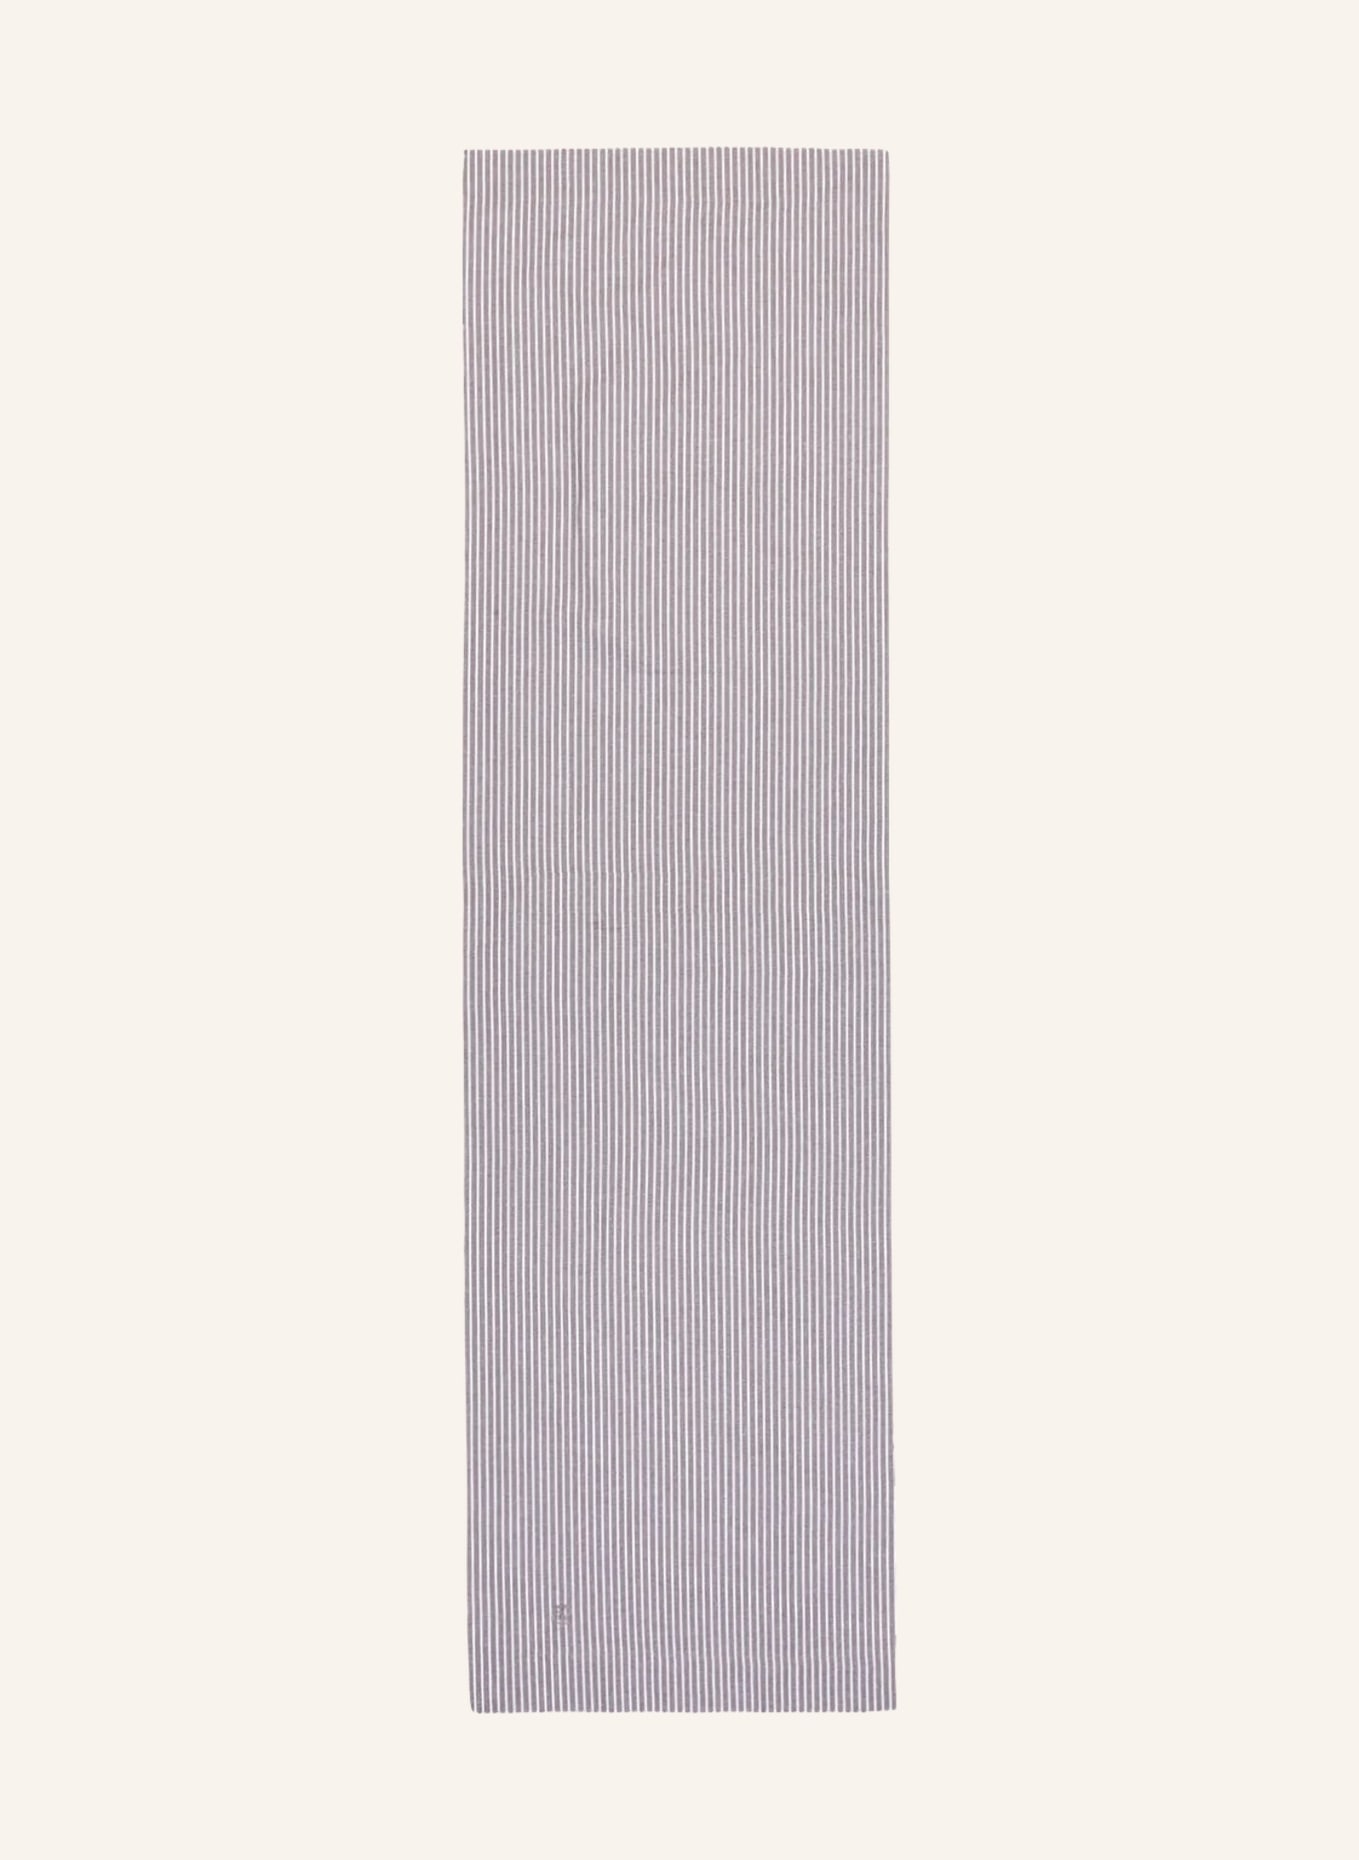 Marc O'Polo Table runner TENSTRA, Color: LIGHT GRAY / WHITE STRIPED (Image 2)